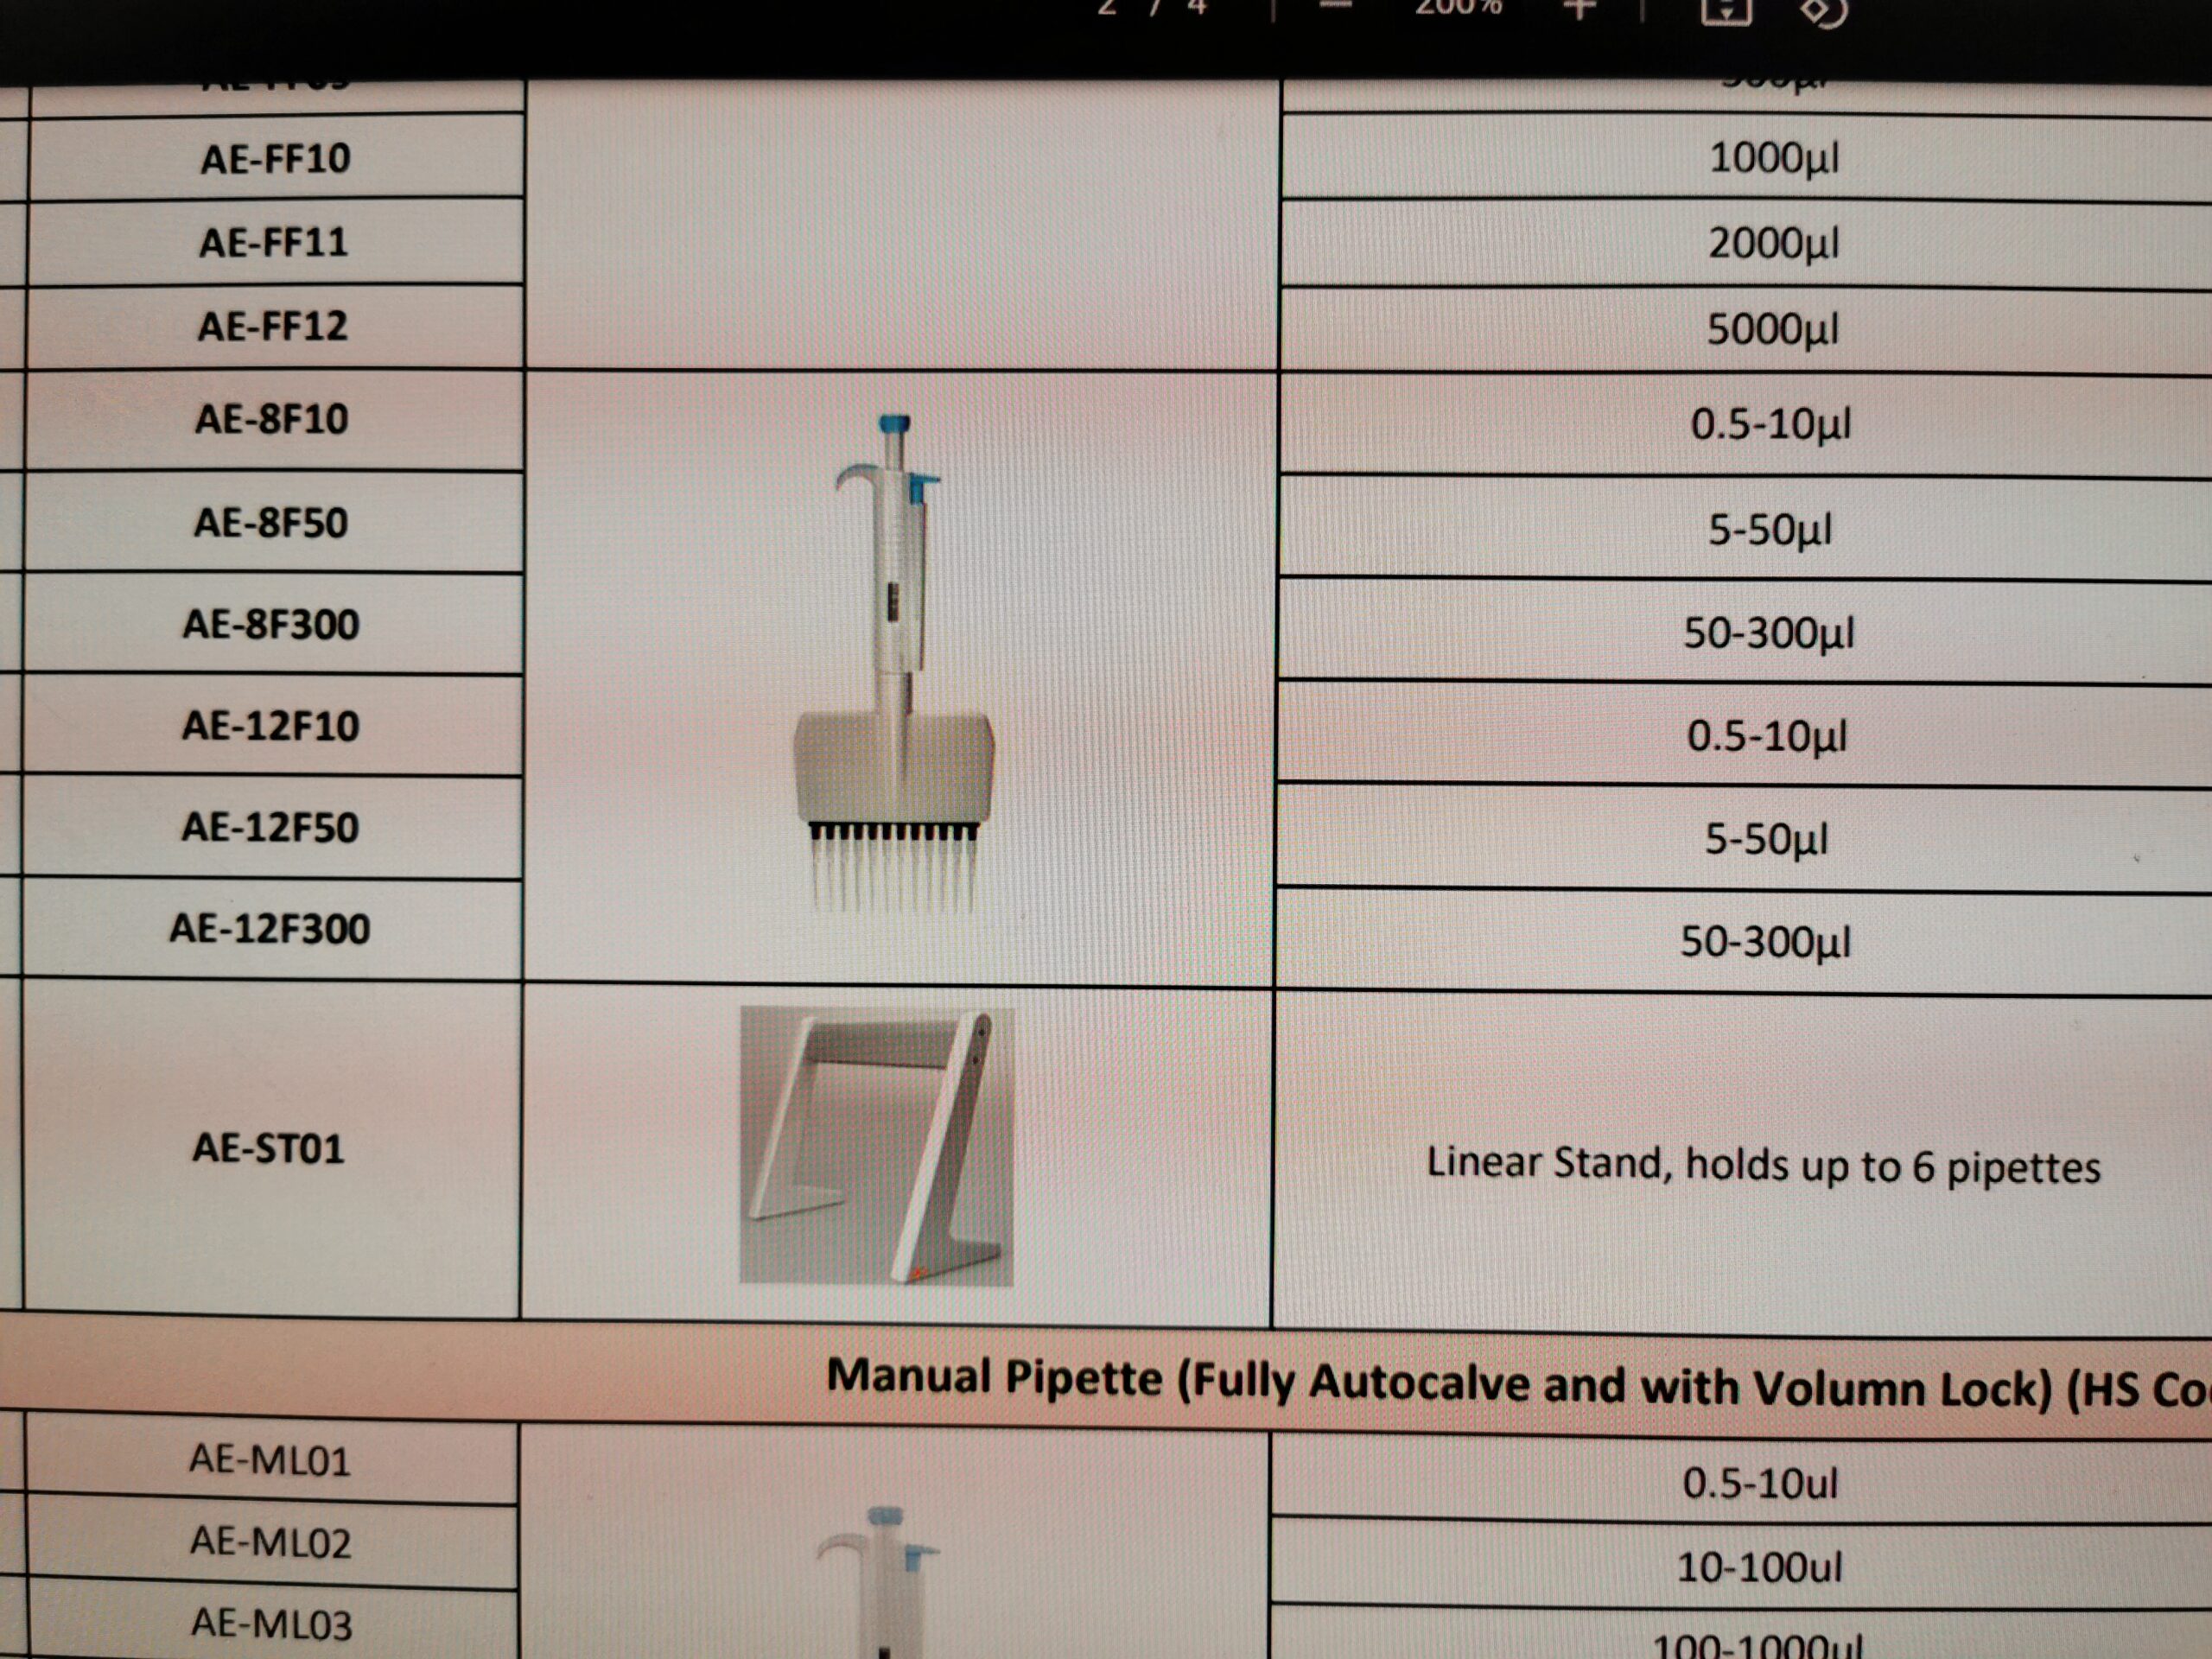 3. $950 each for 12-Channel Pipette